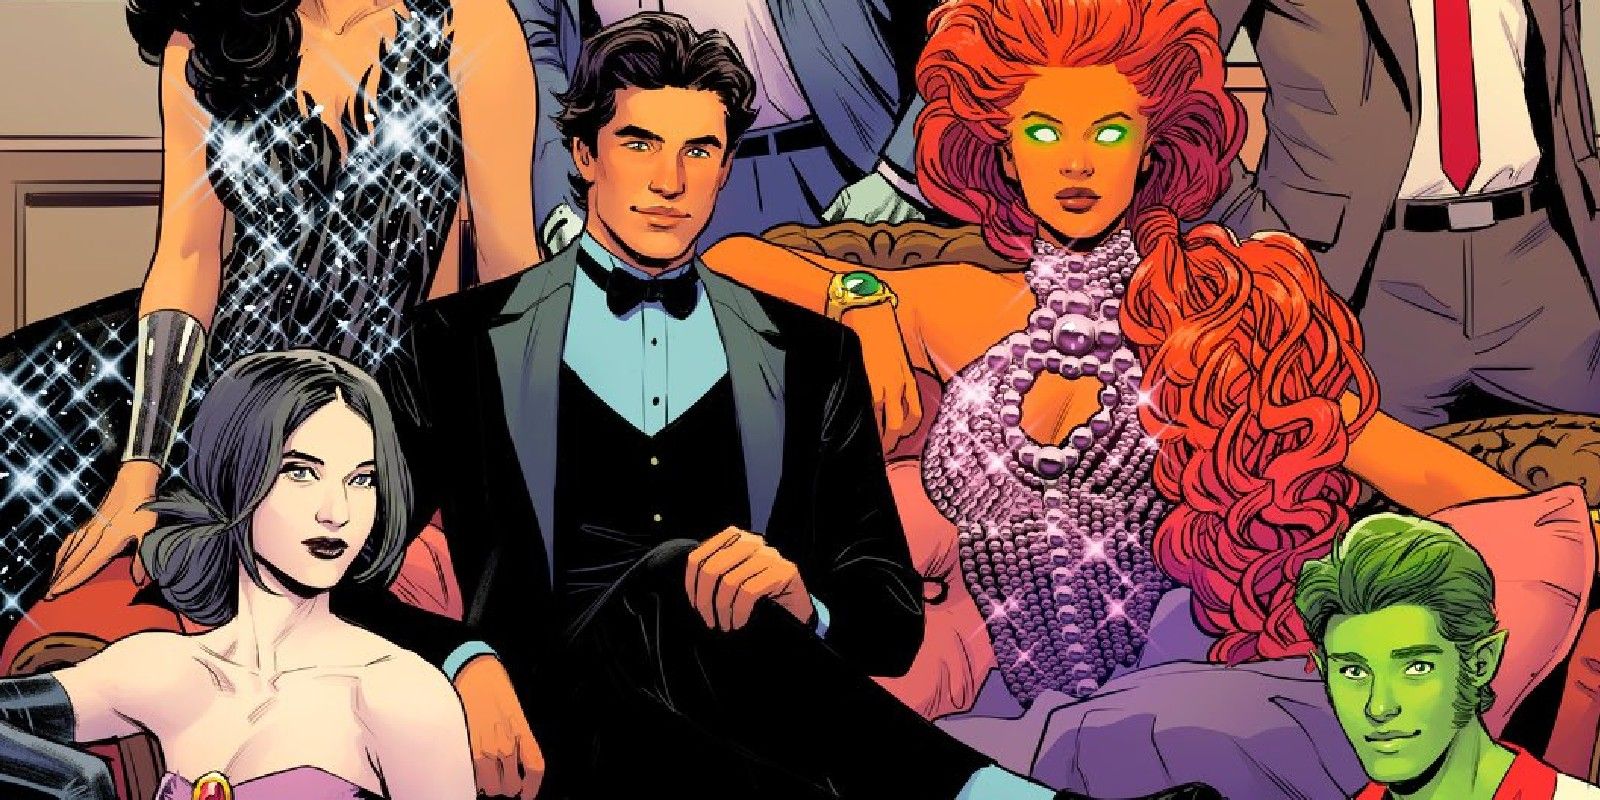 Nightwing Cover Focusing on Dick Grayson and Starfire in Gala Formal Wear